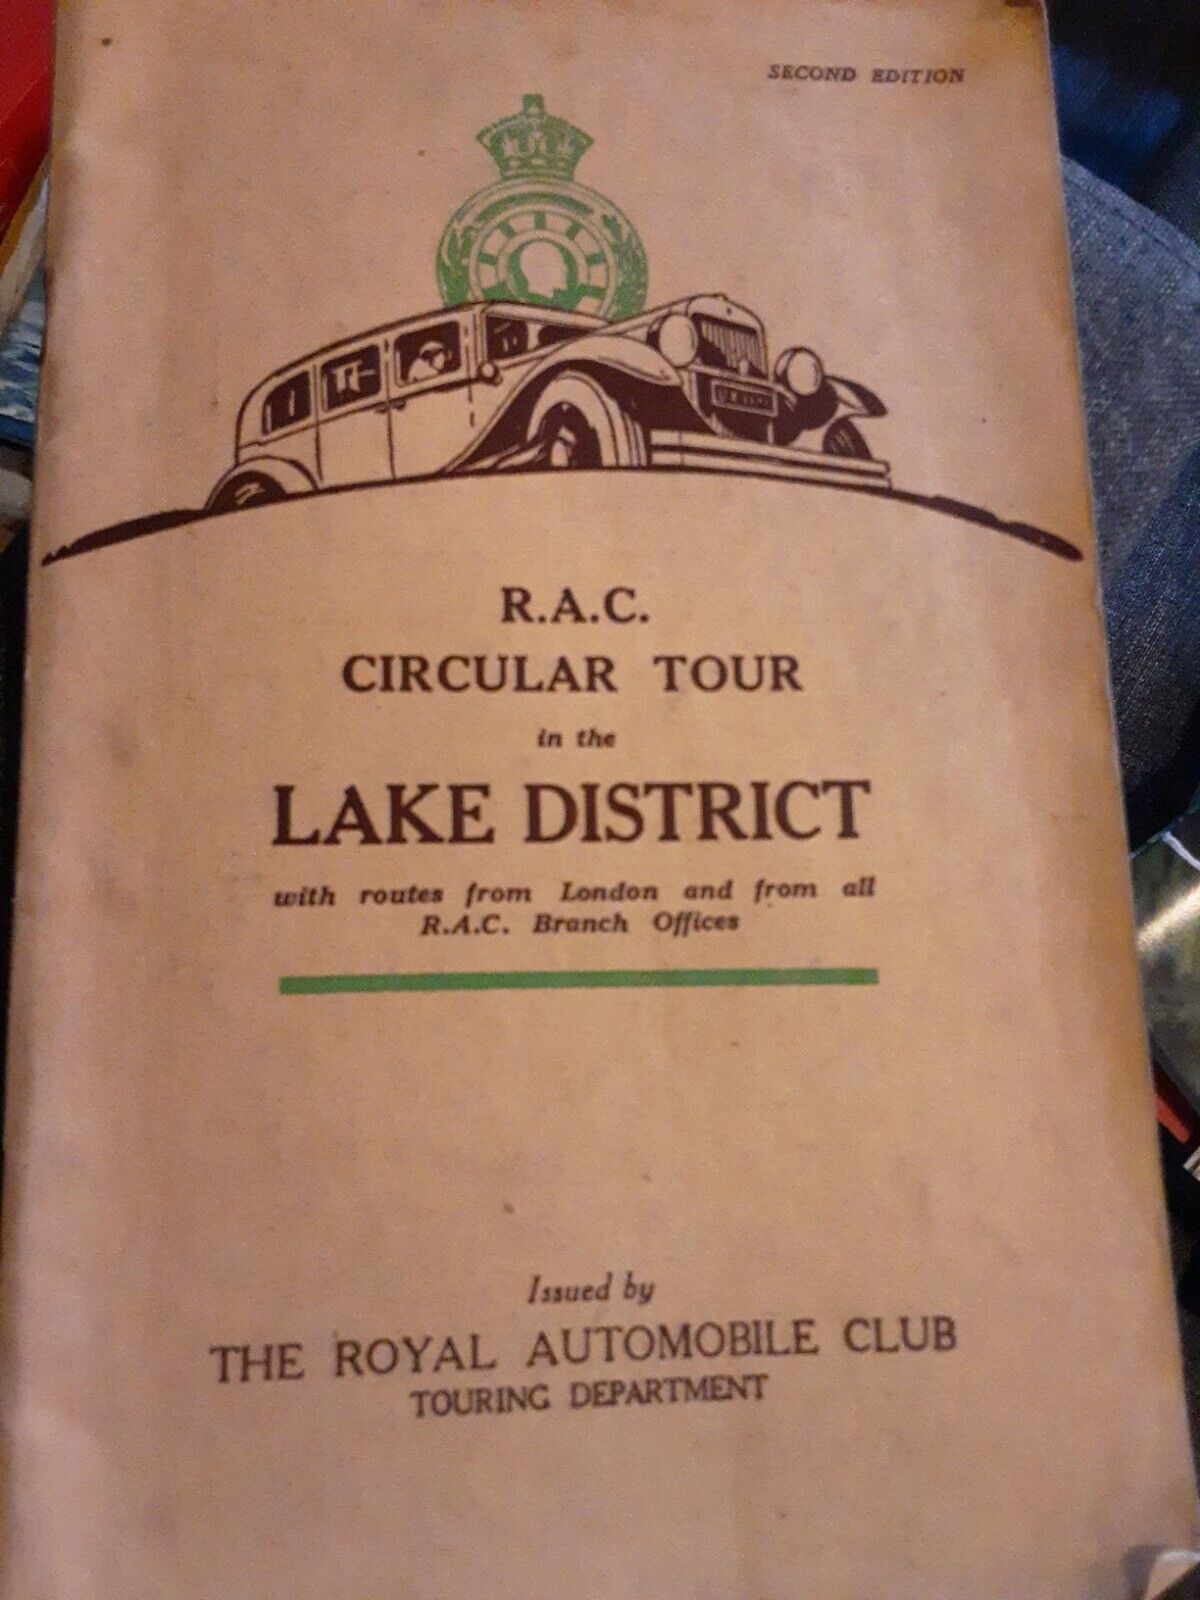 R.A.C Circular Tour of the Lake District, Second Edition Id: C5